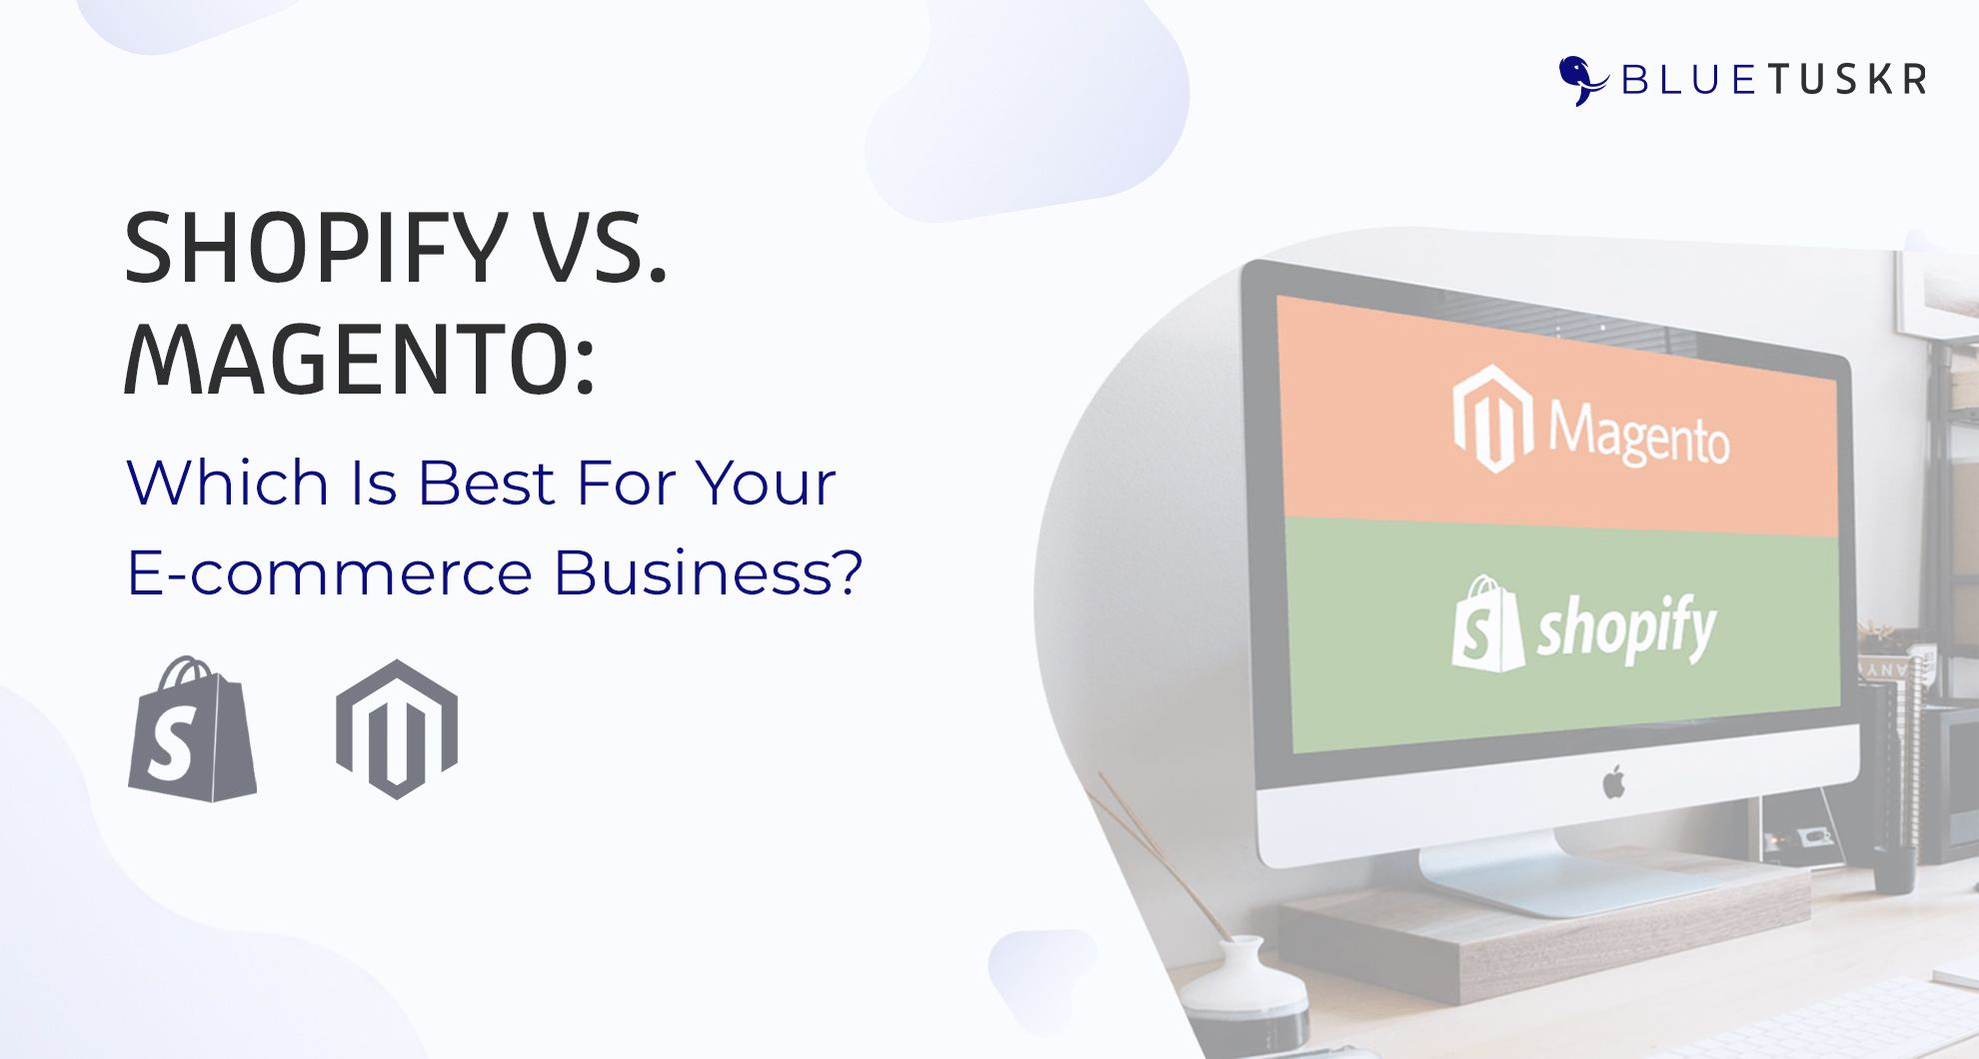 Shopify vs. Magento: Which Is Best For Your E-commerce Business?